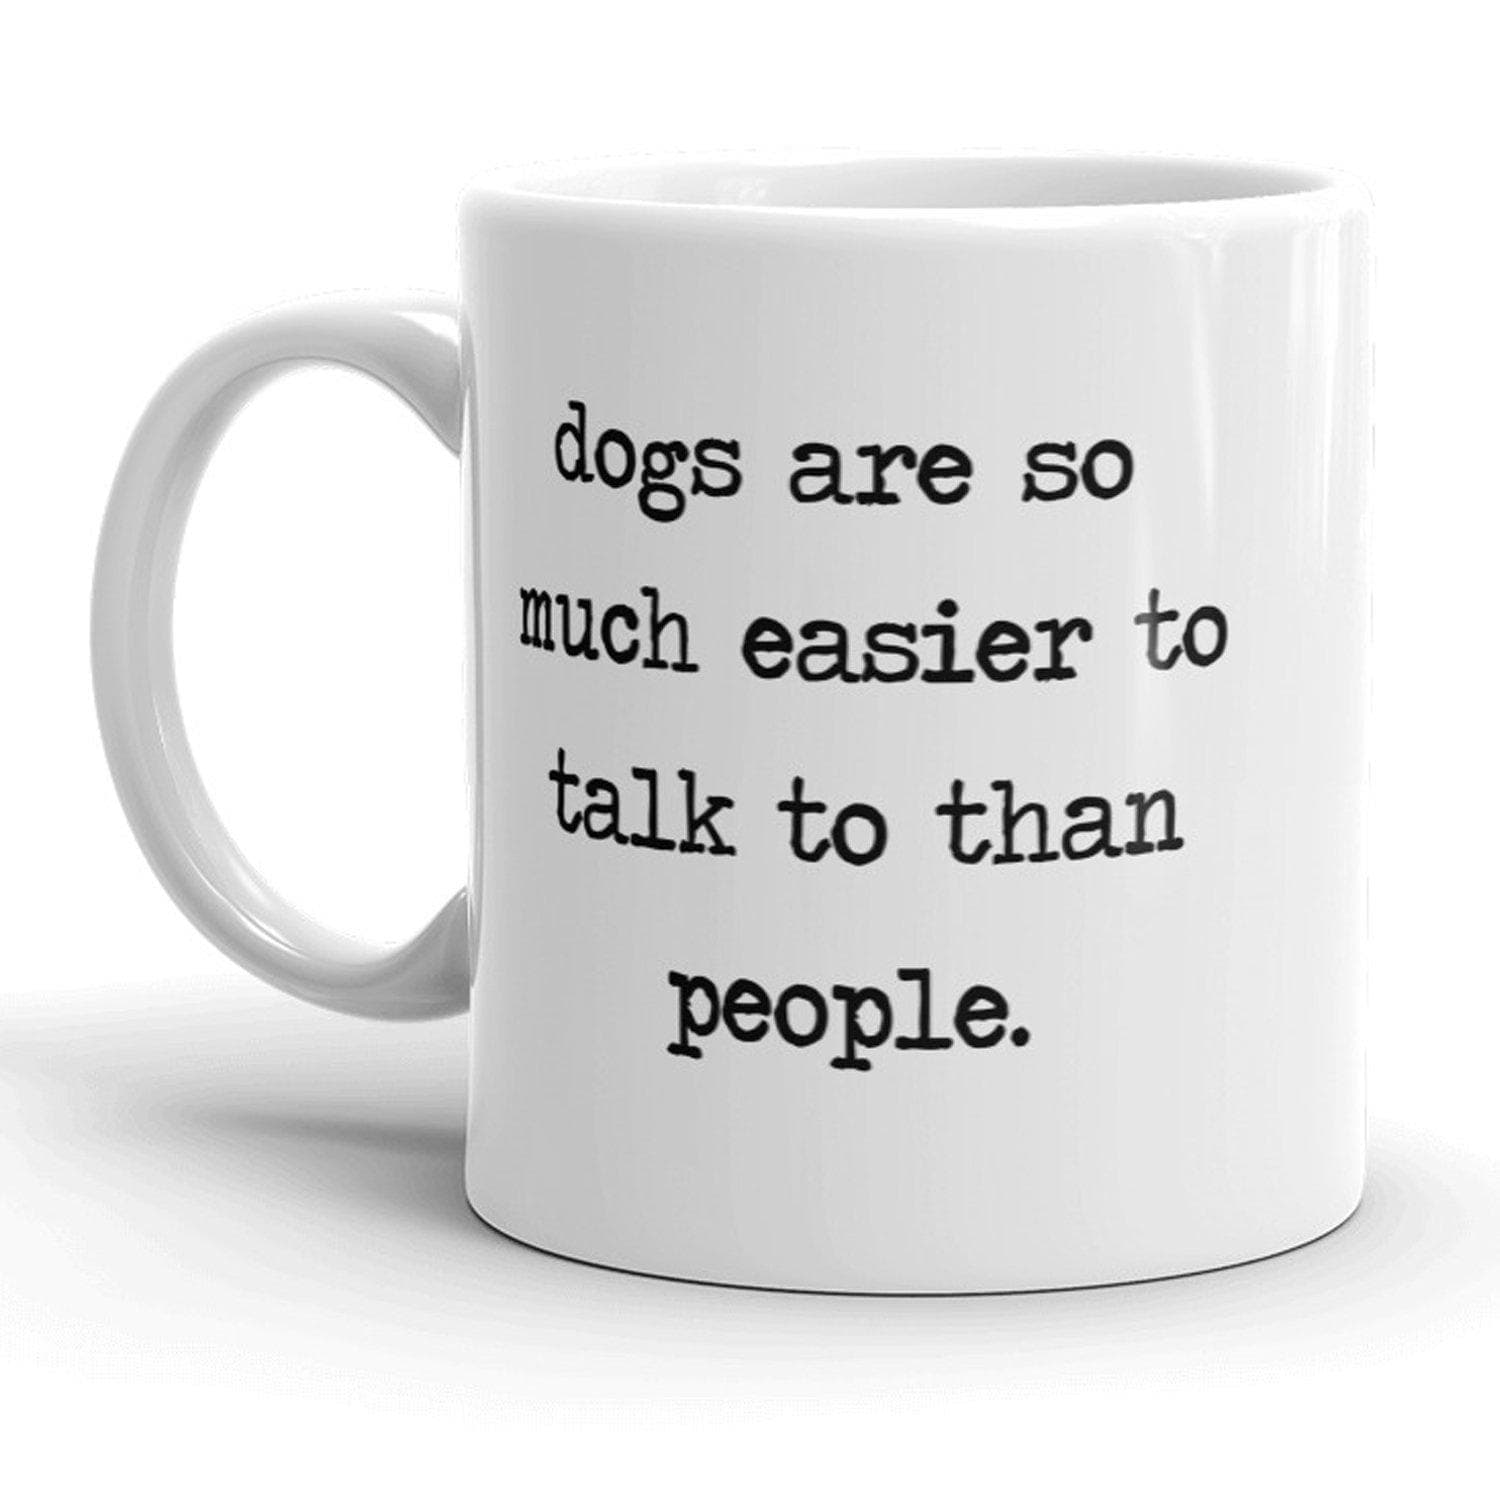 Dogs Are So Much Easier To Talk To Than People Mug - Crazy Dog T-Shirts